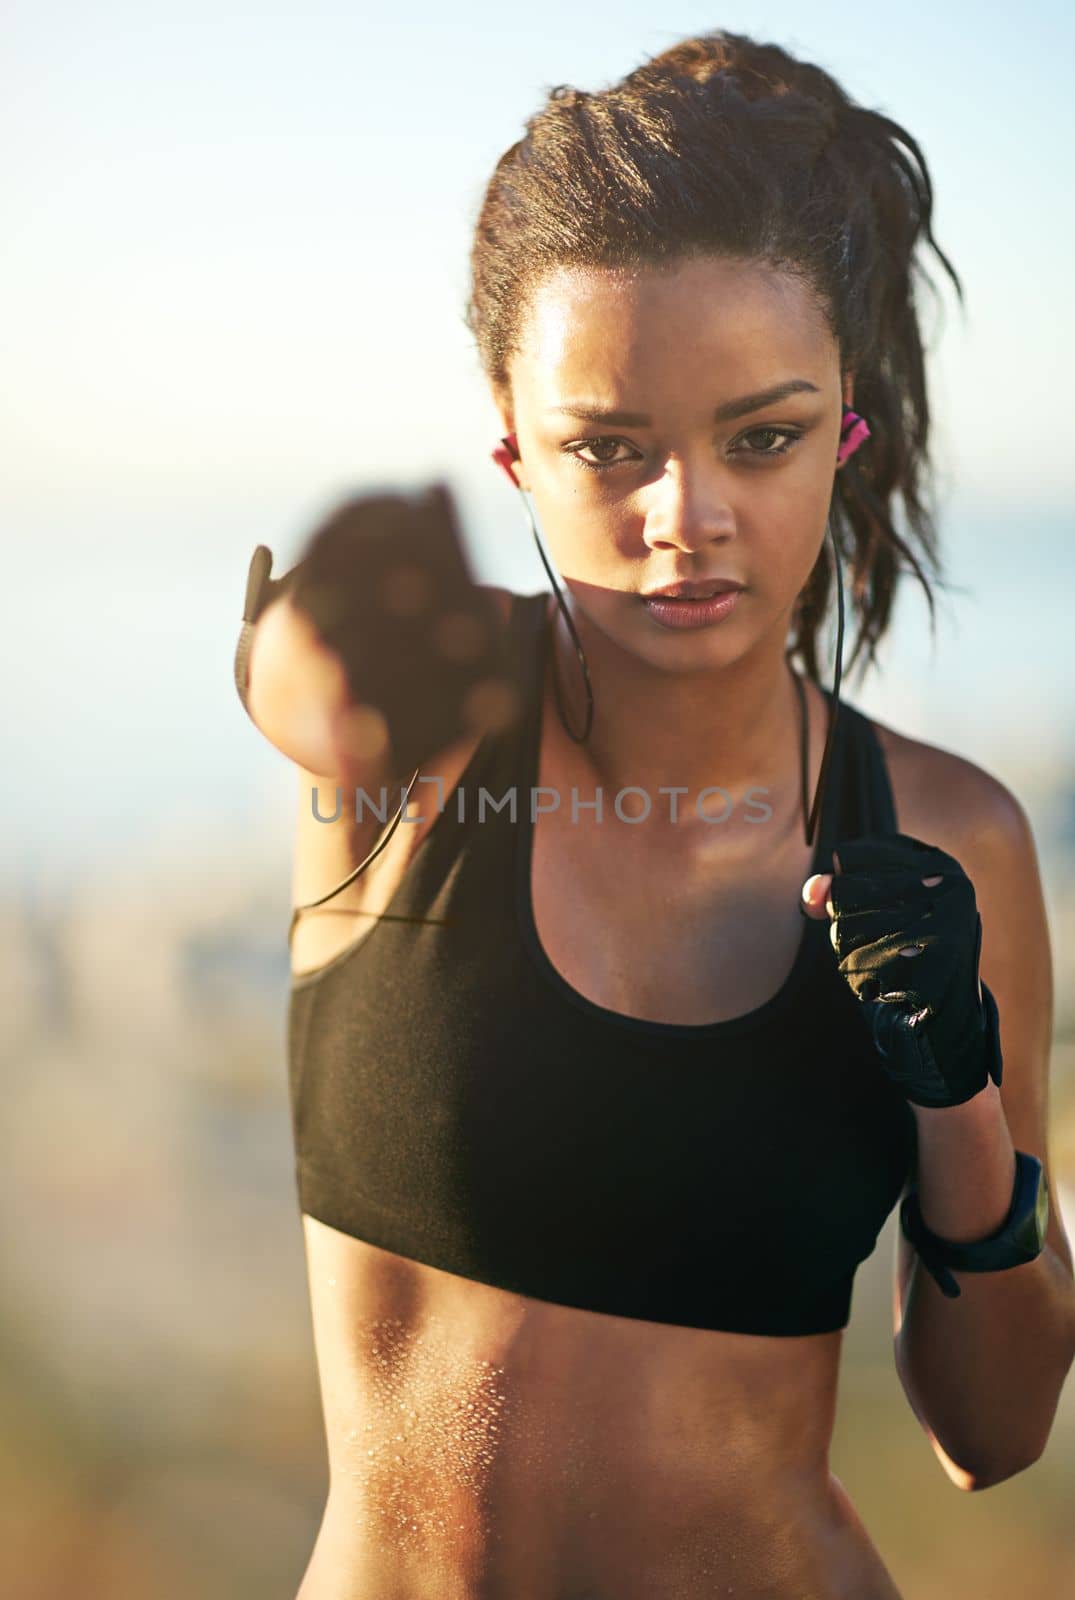 Strike while youre hot. a young woman exercising outdoors